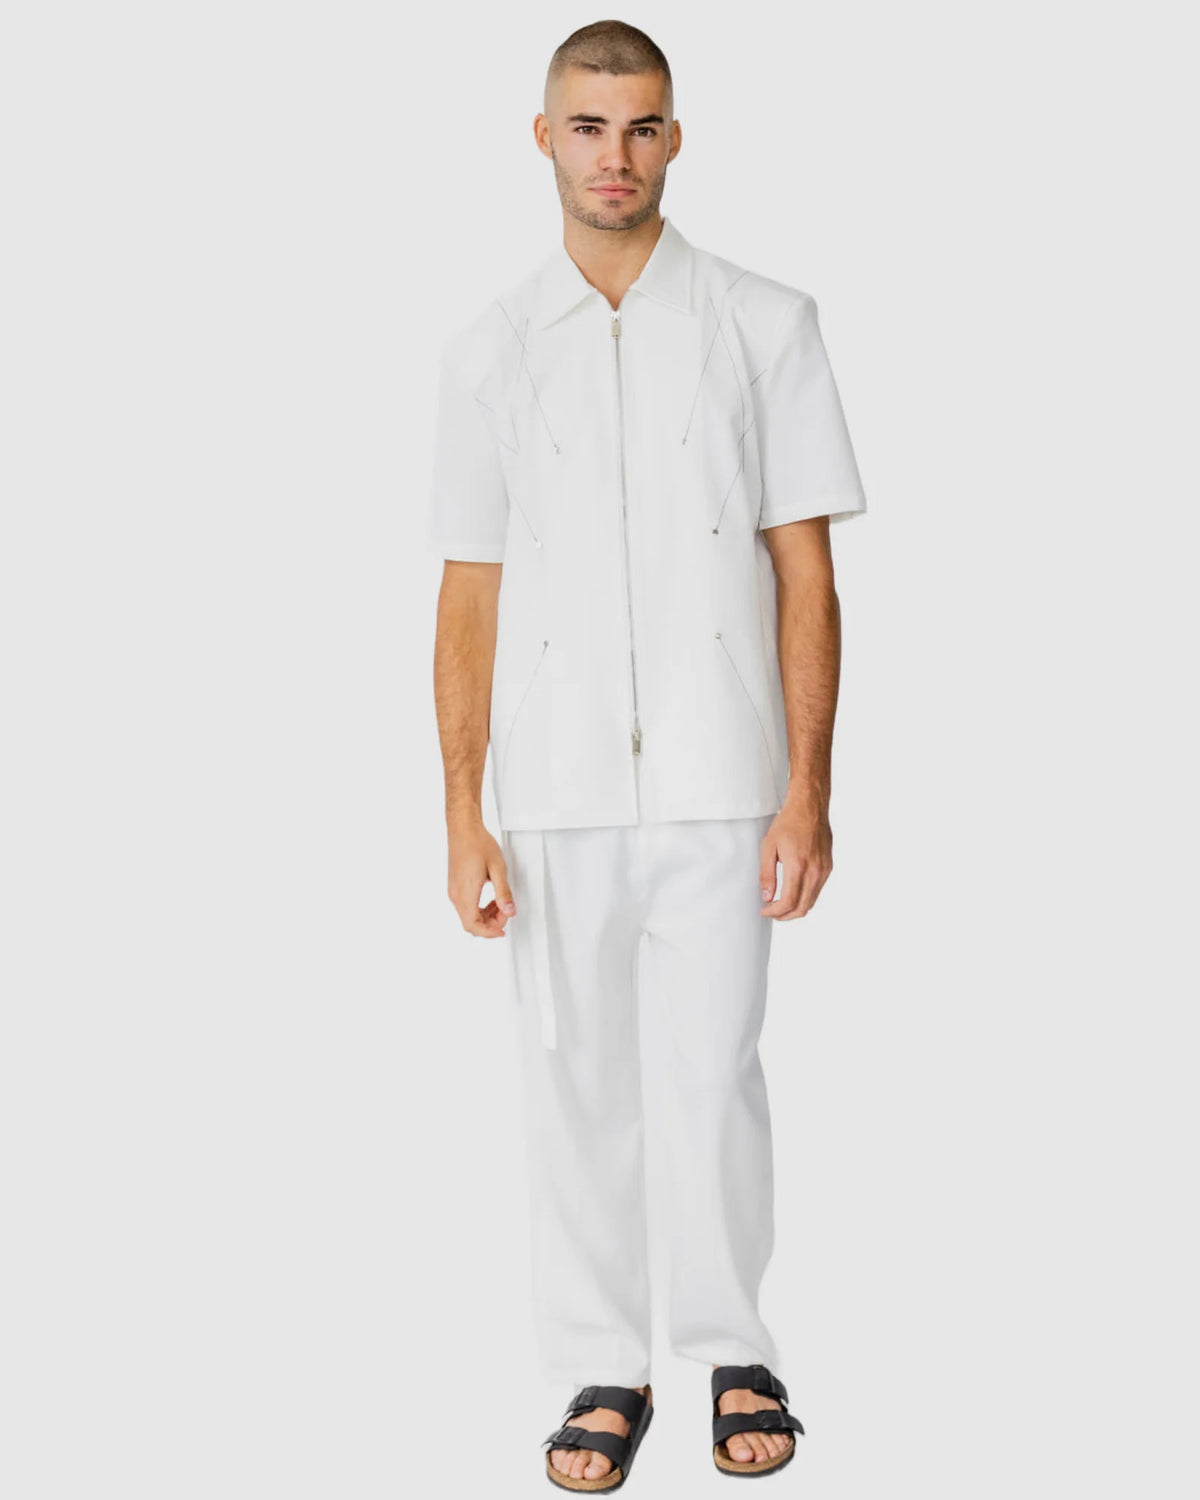 Justin Cassin  Quentin Short Sleeve Zip Shirt in White Color 2